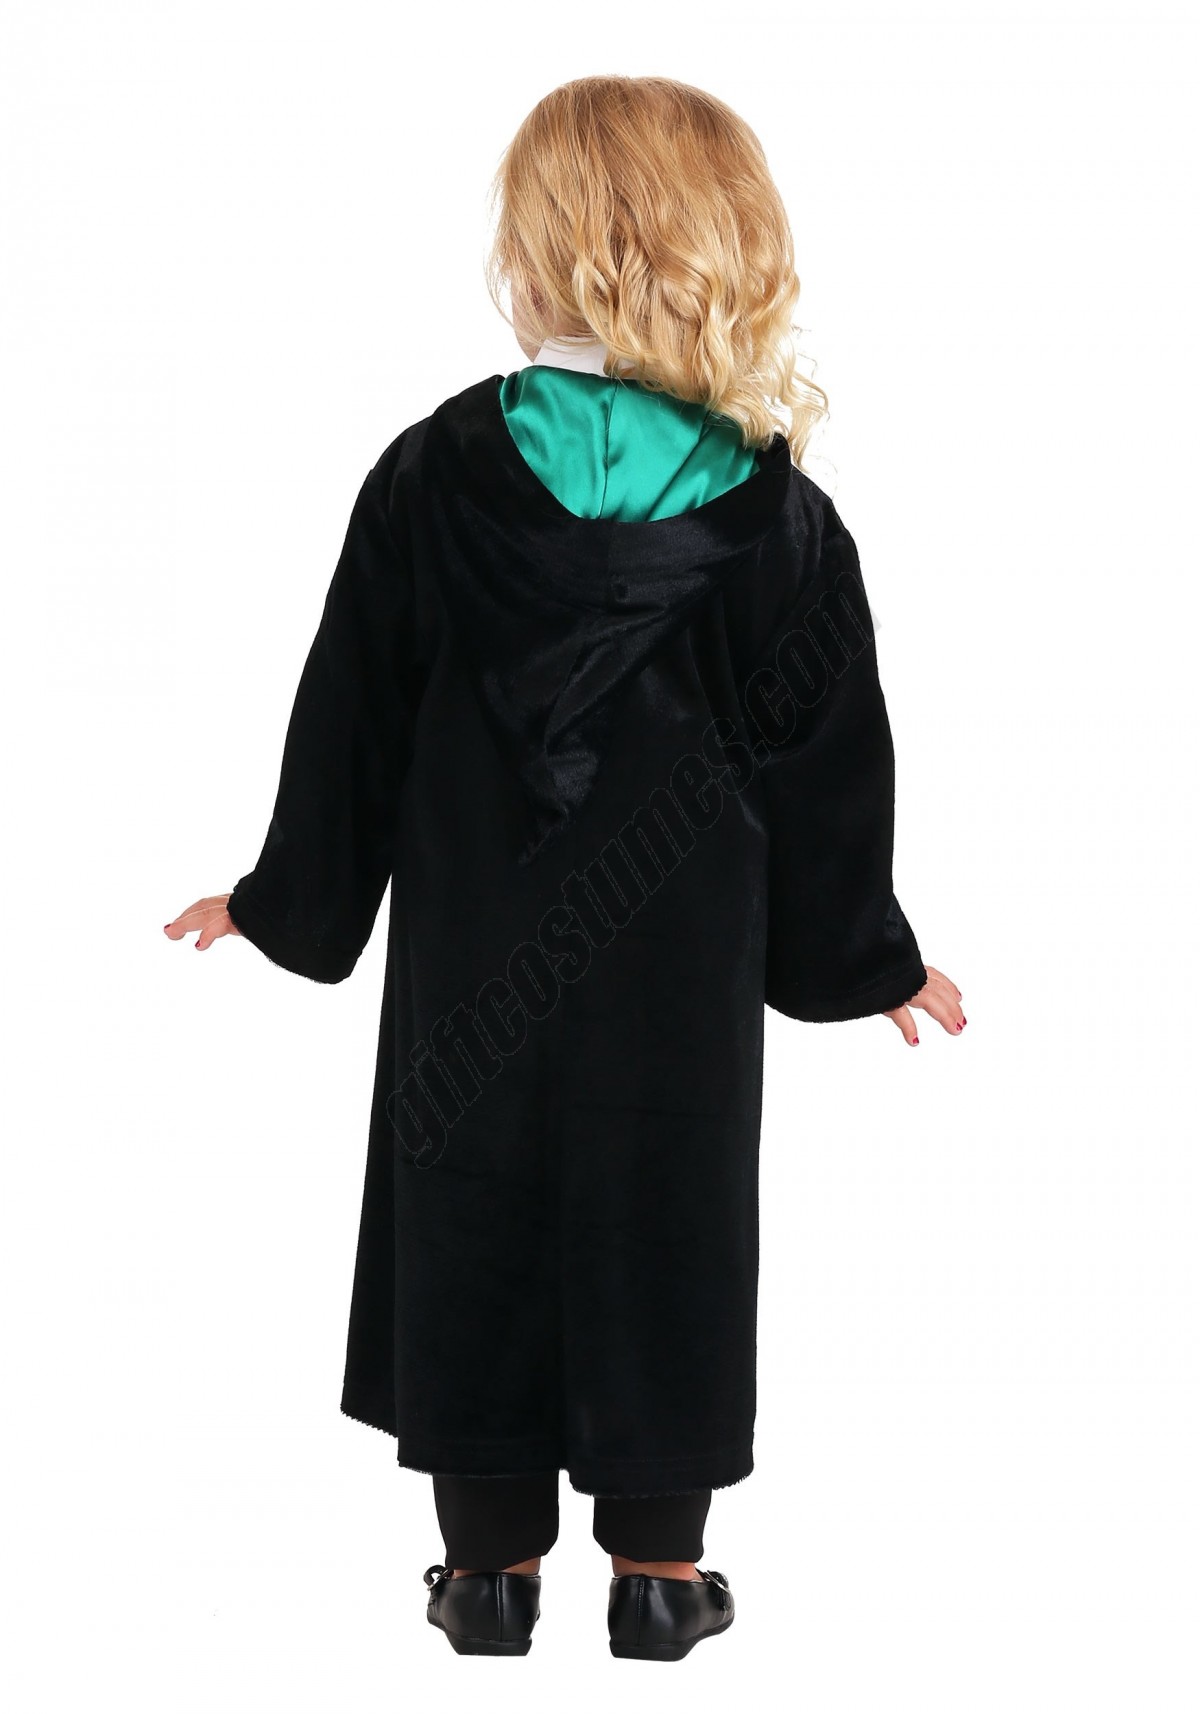 Kids Harry Potter Deluxe Slytherin Robe Costume Promotions - -3